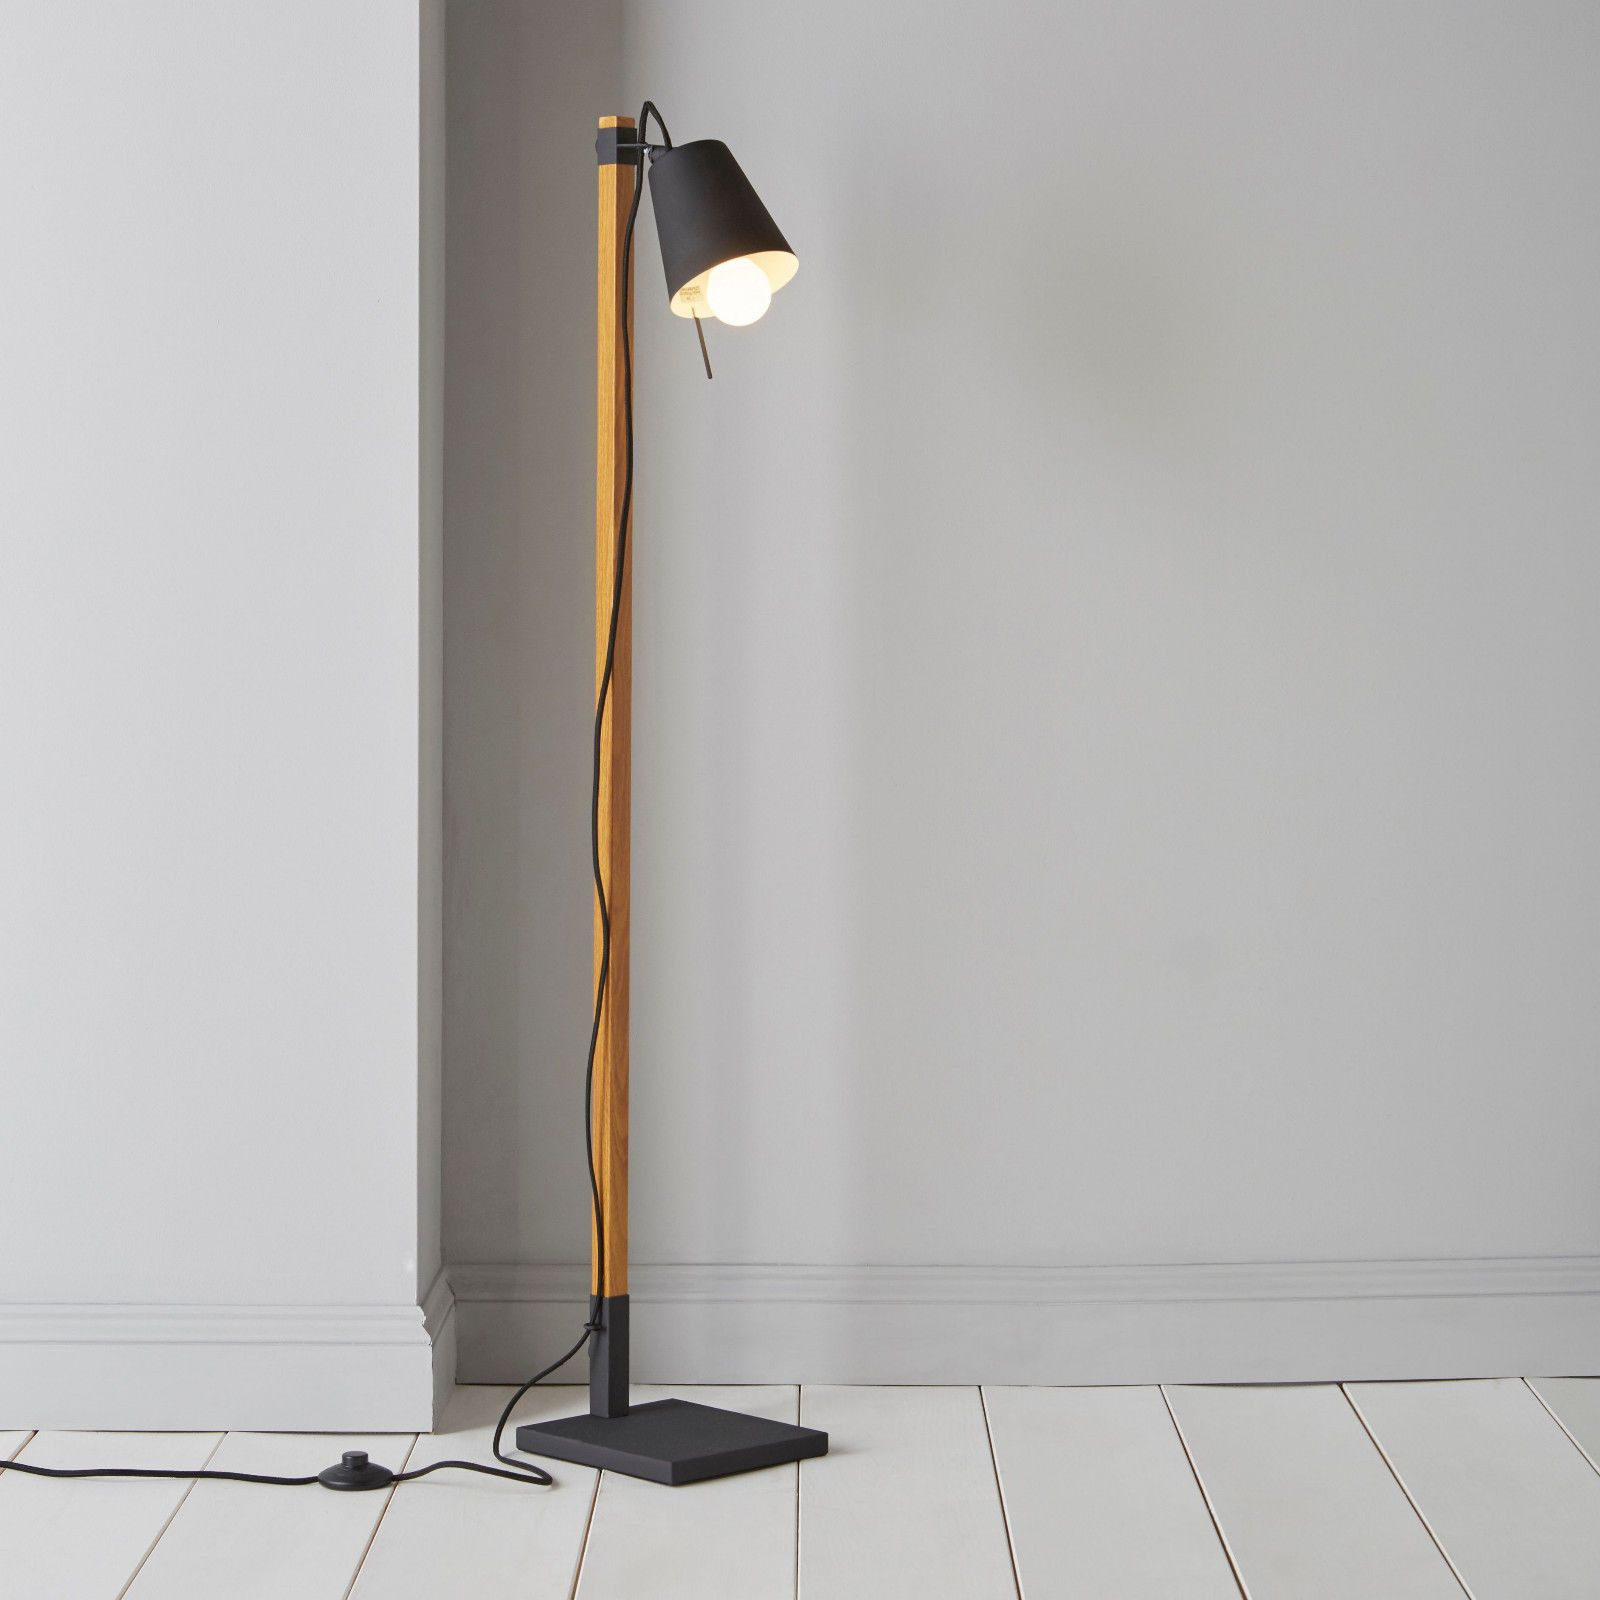 11 attractive Lamp Vase Cap 2024 free download lamp vase cap of this black floor lamp base gives you a simple yet elegant design throughout this black floor lamp base gives you a simple yet elegant design for your home bulb required edis